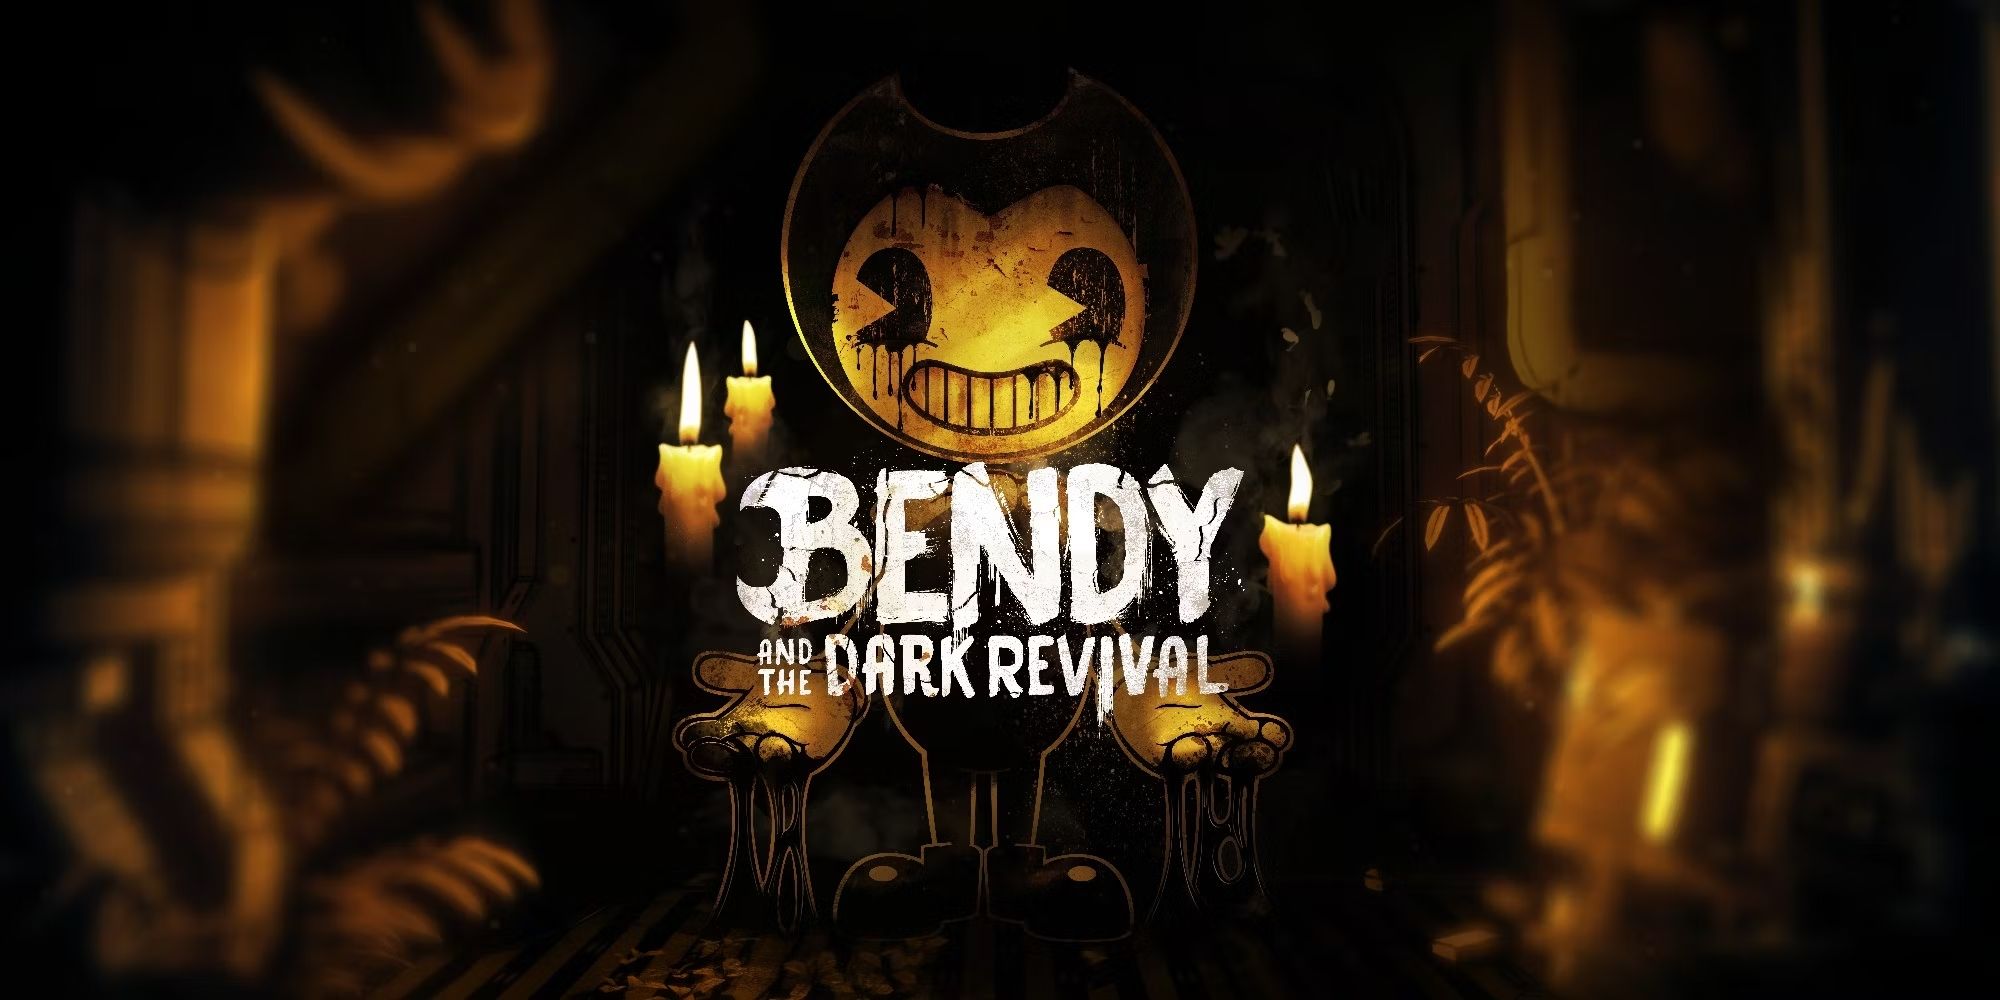 Bendy And The Dark Revival Lands On Consoles